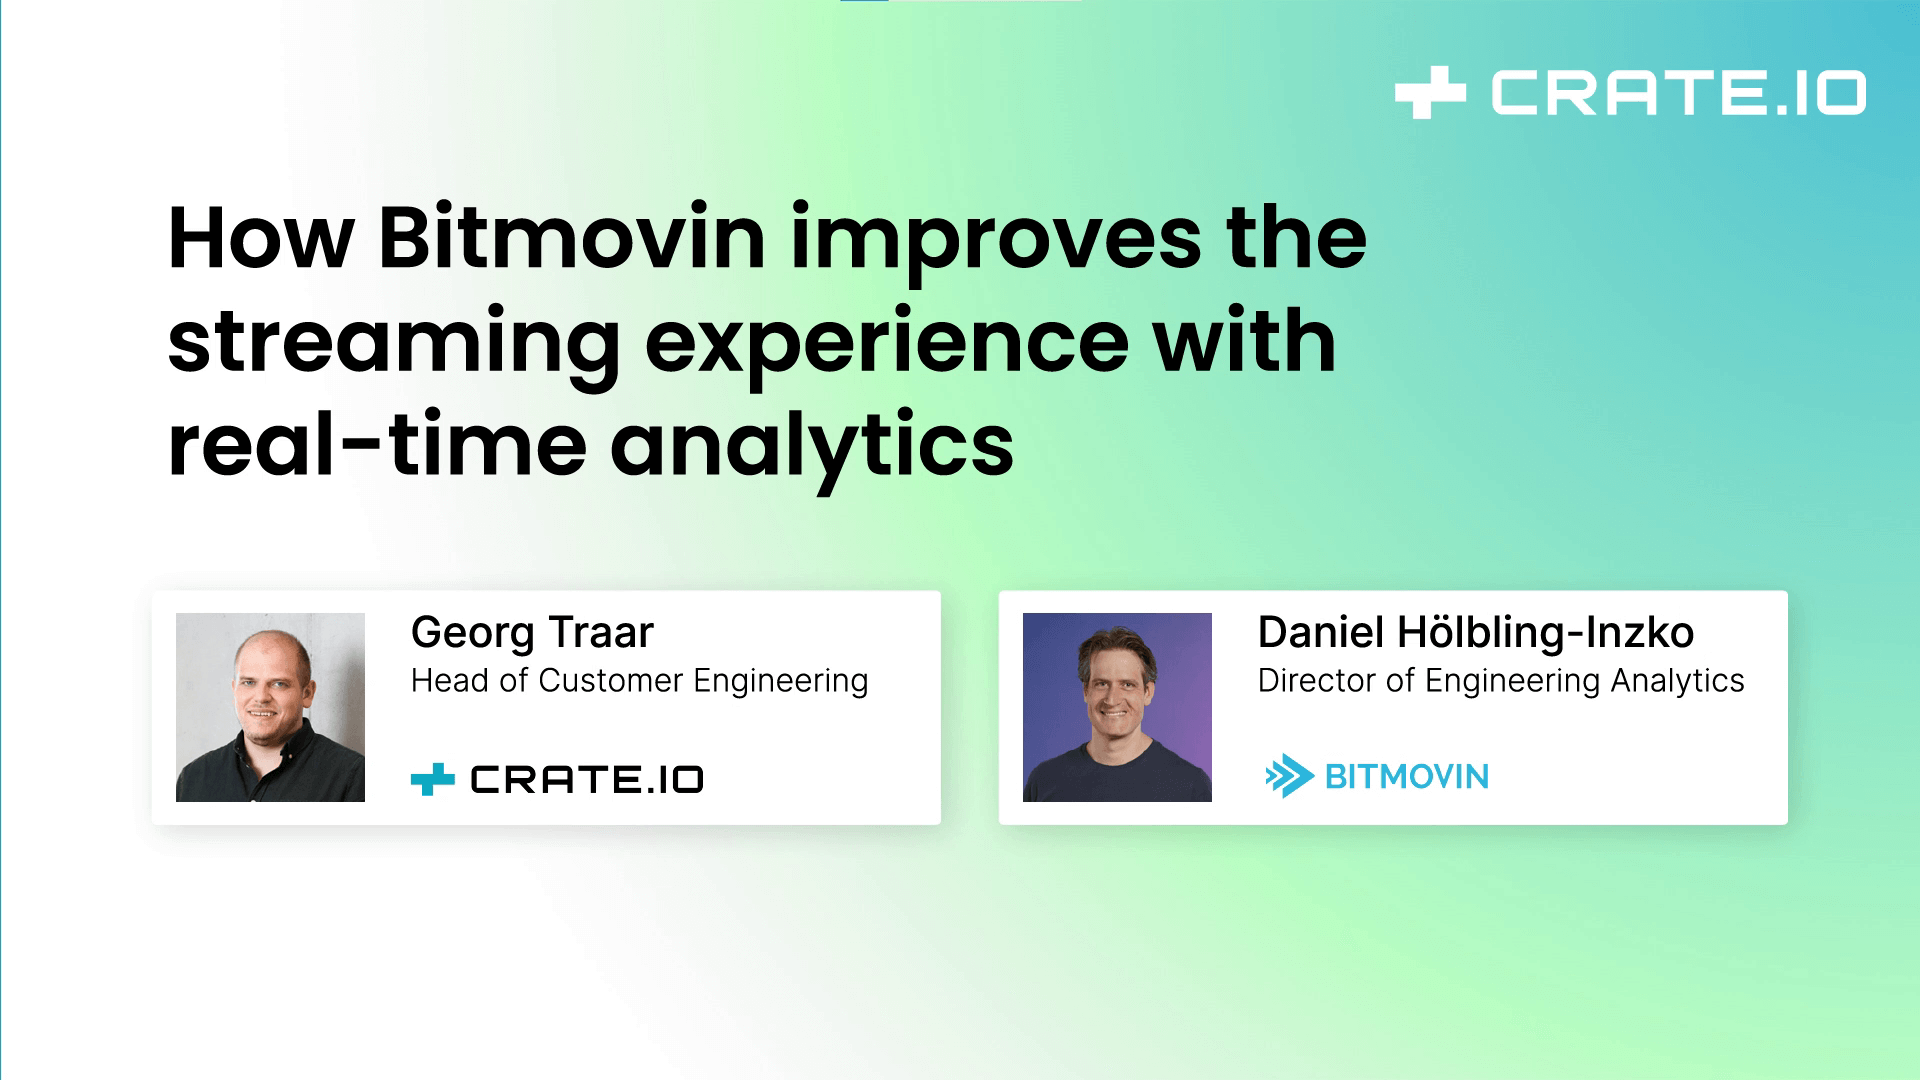 How Bitmovin improves the streaming experience with real-time analytics